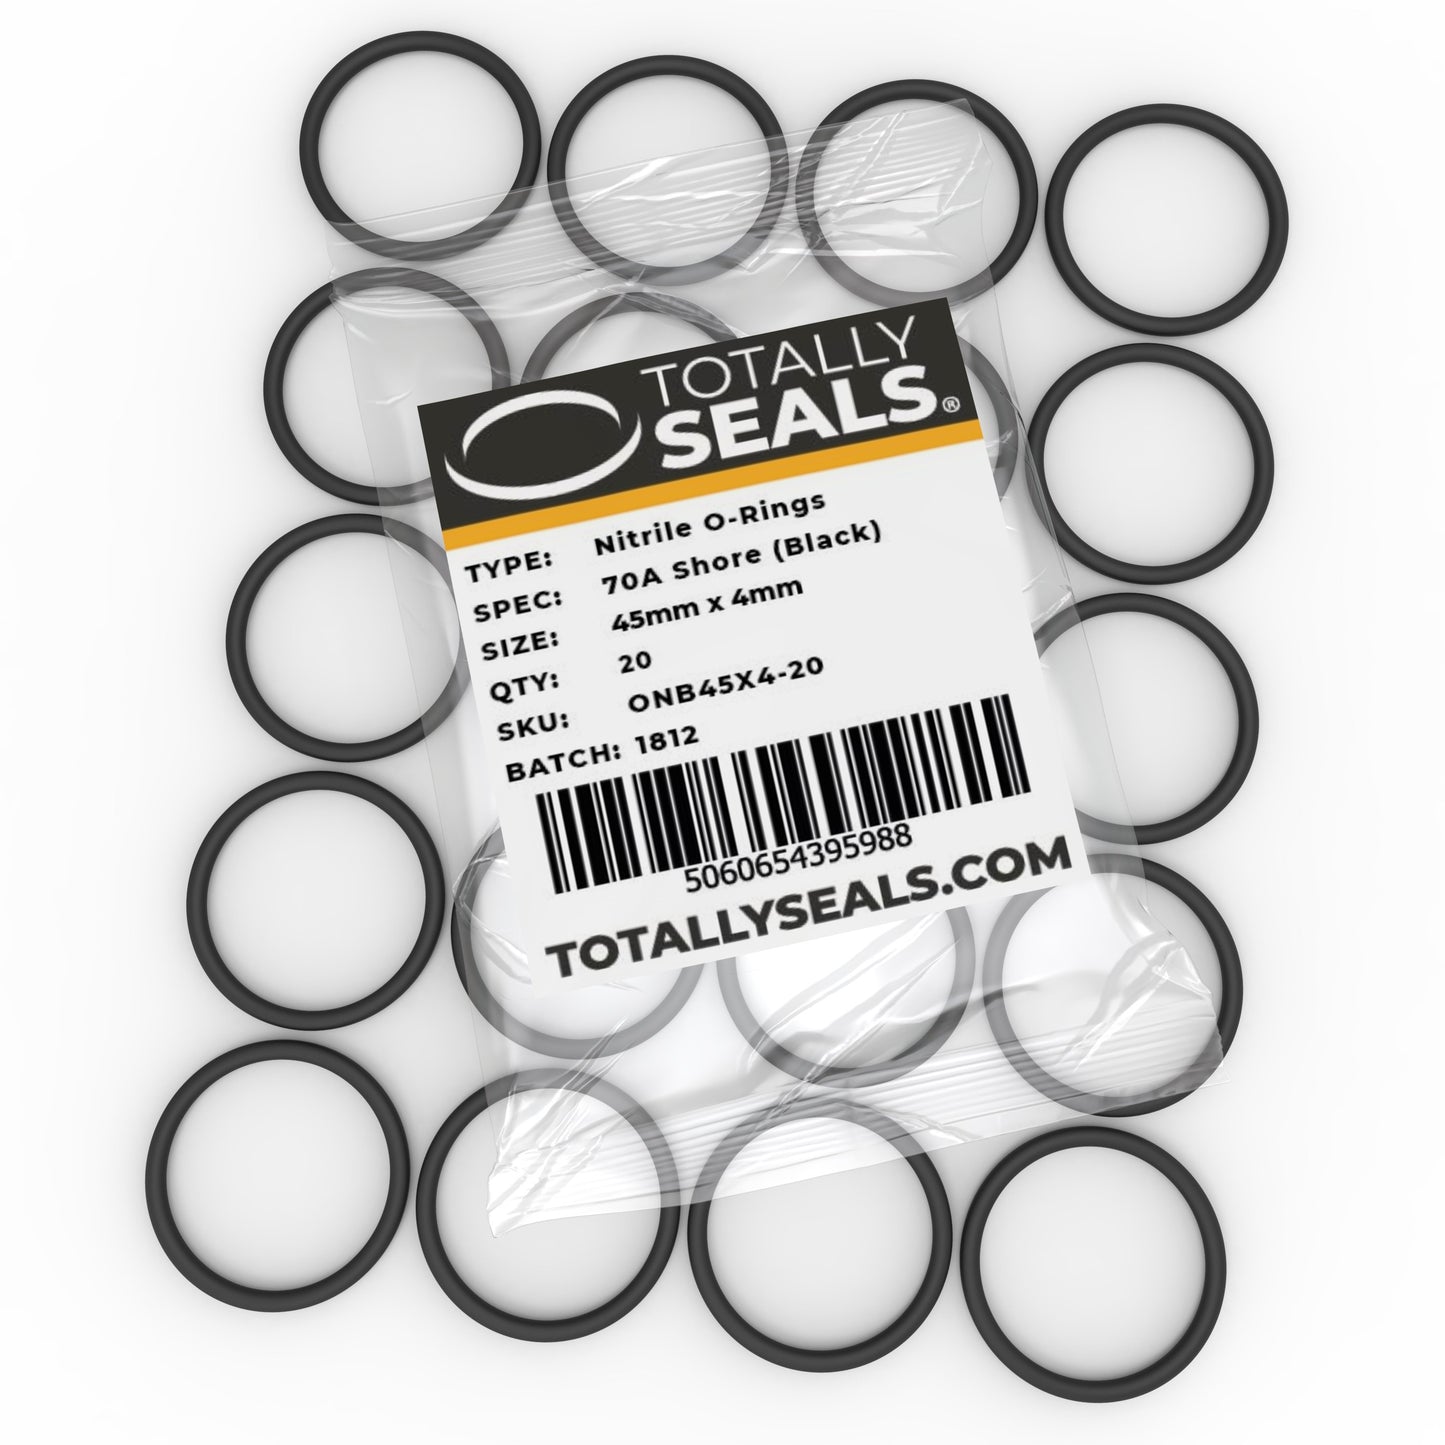 45mm x 4mm (53mm OD) Nitrile O-Rings - Totally Seals®